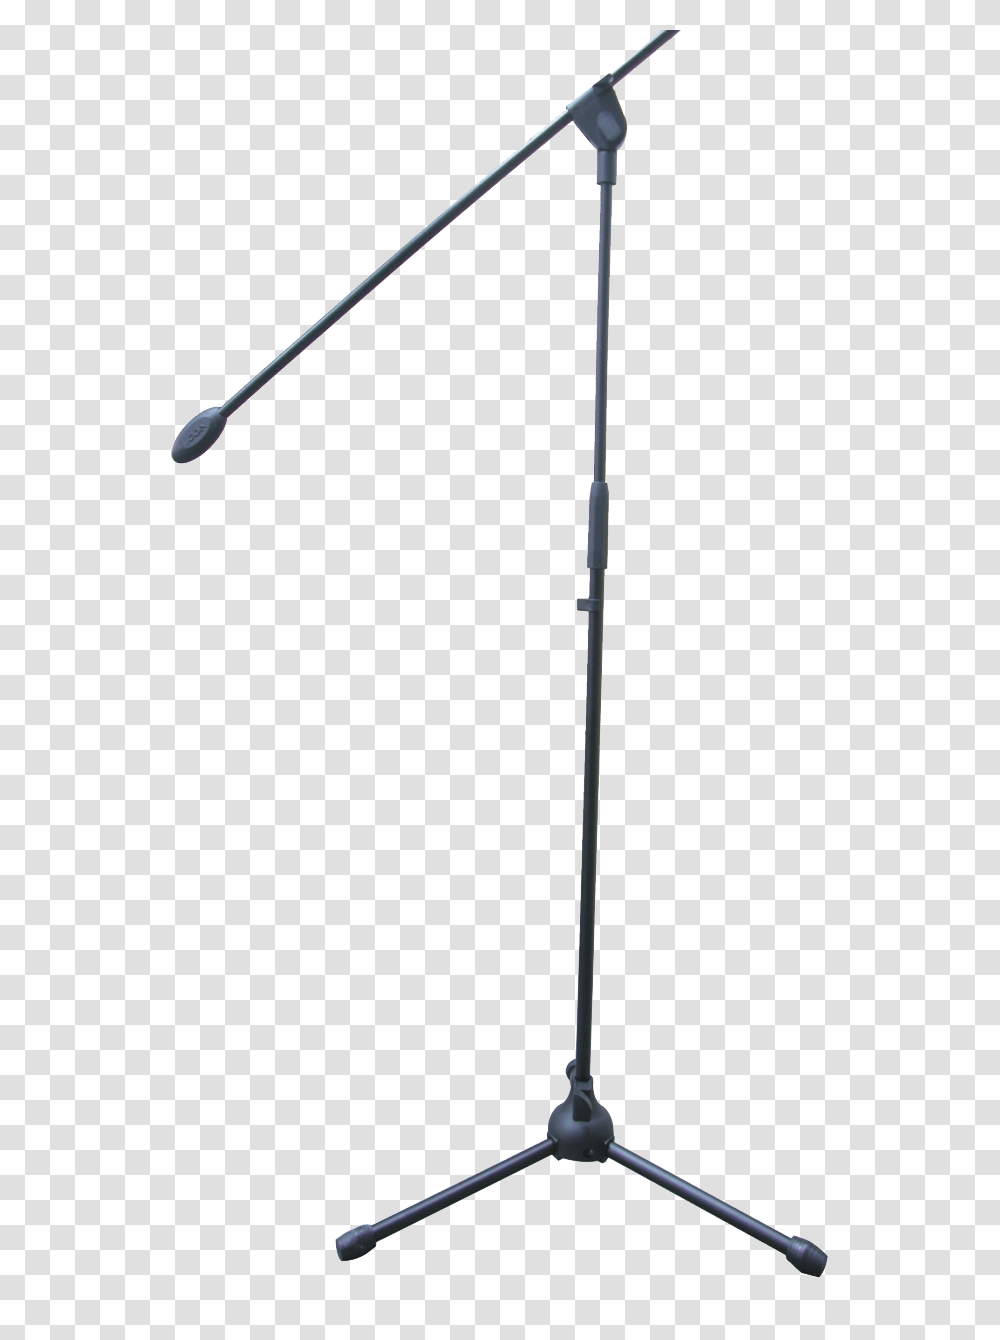 Microphone Stand Clip Art, Stick, Cane, Bow, Handrail Transparent Png